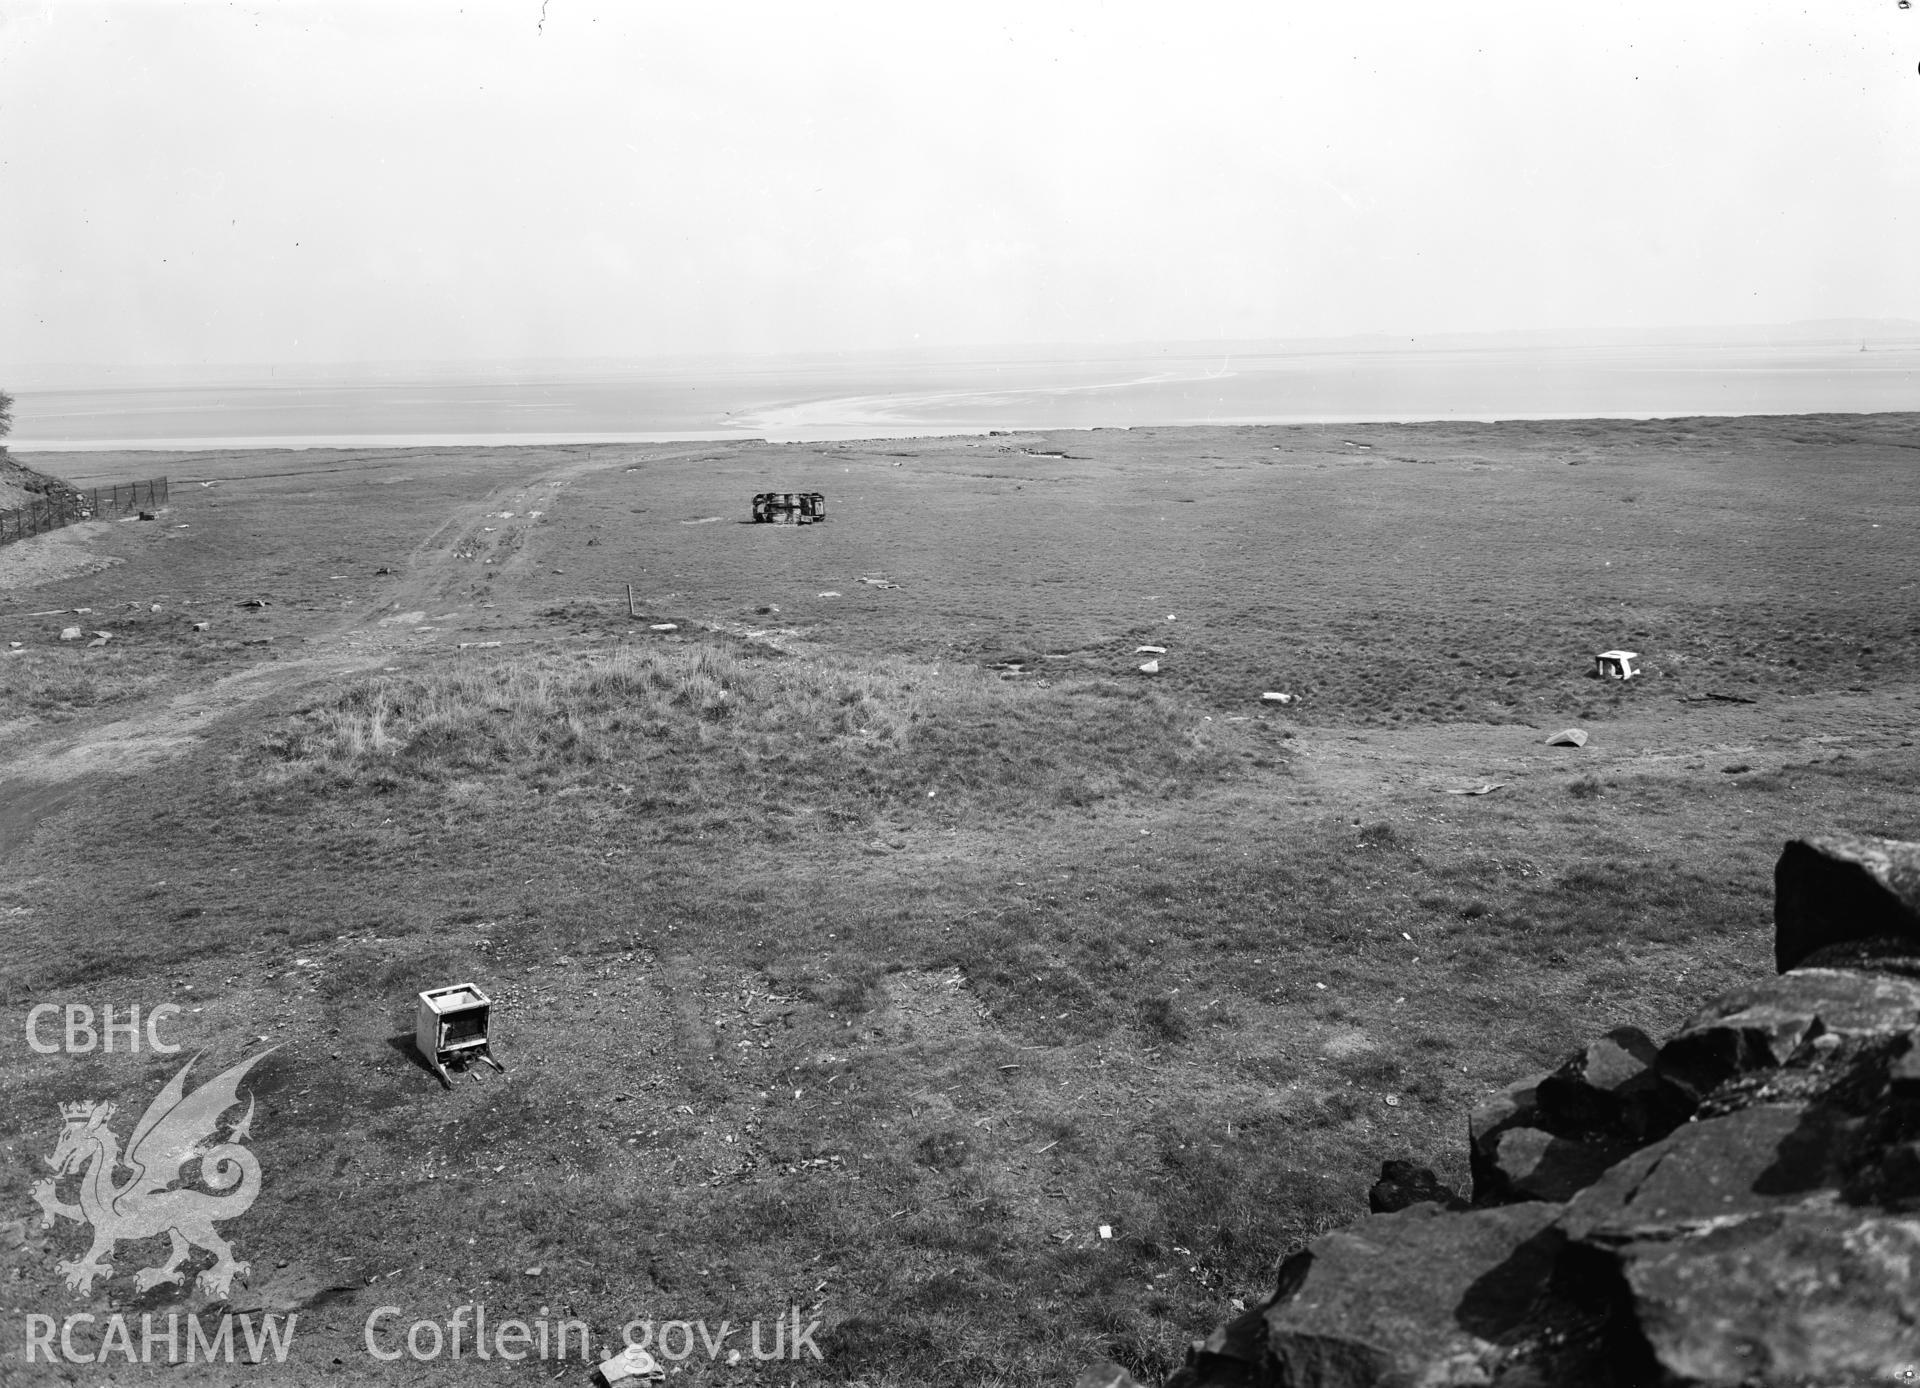 D.O.E photograph of Flint Gaol - view over saltings looking north towards the Dee Estuary. In castle outer ward (since removed).